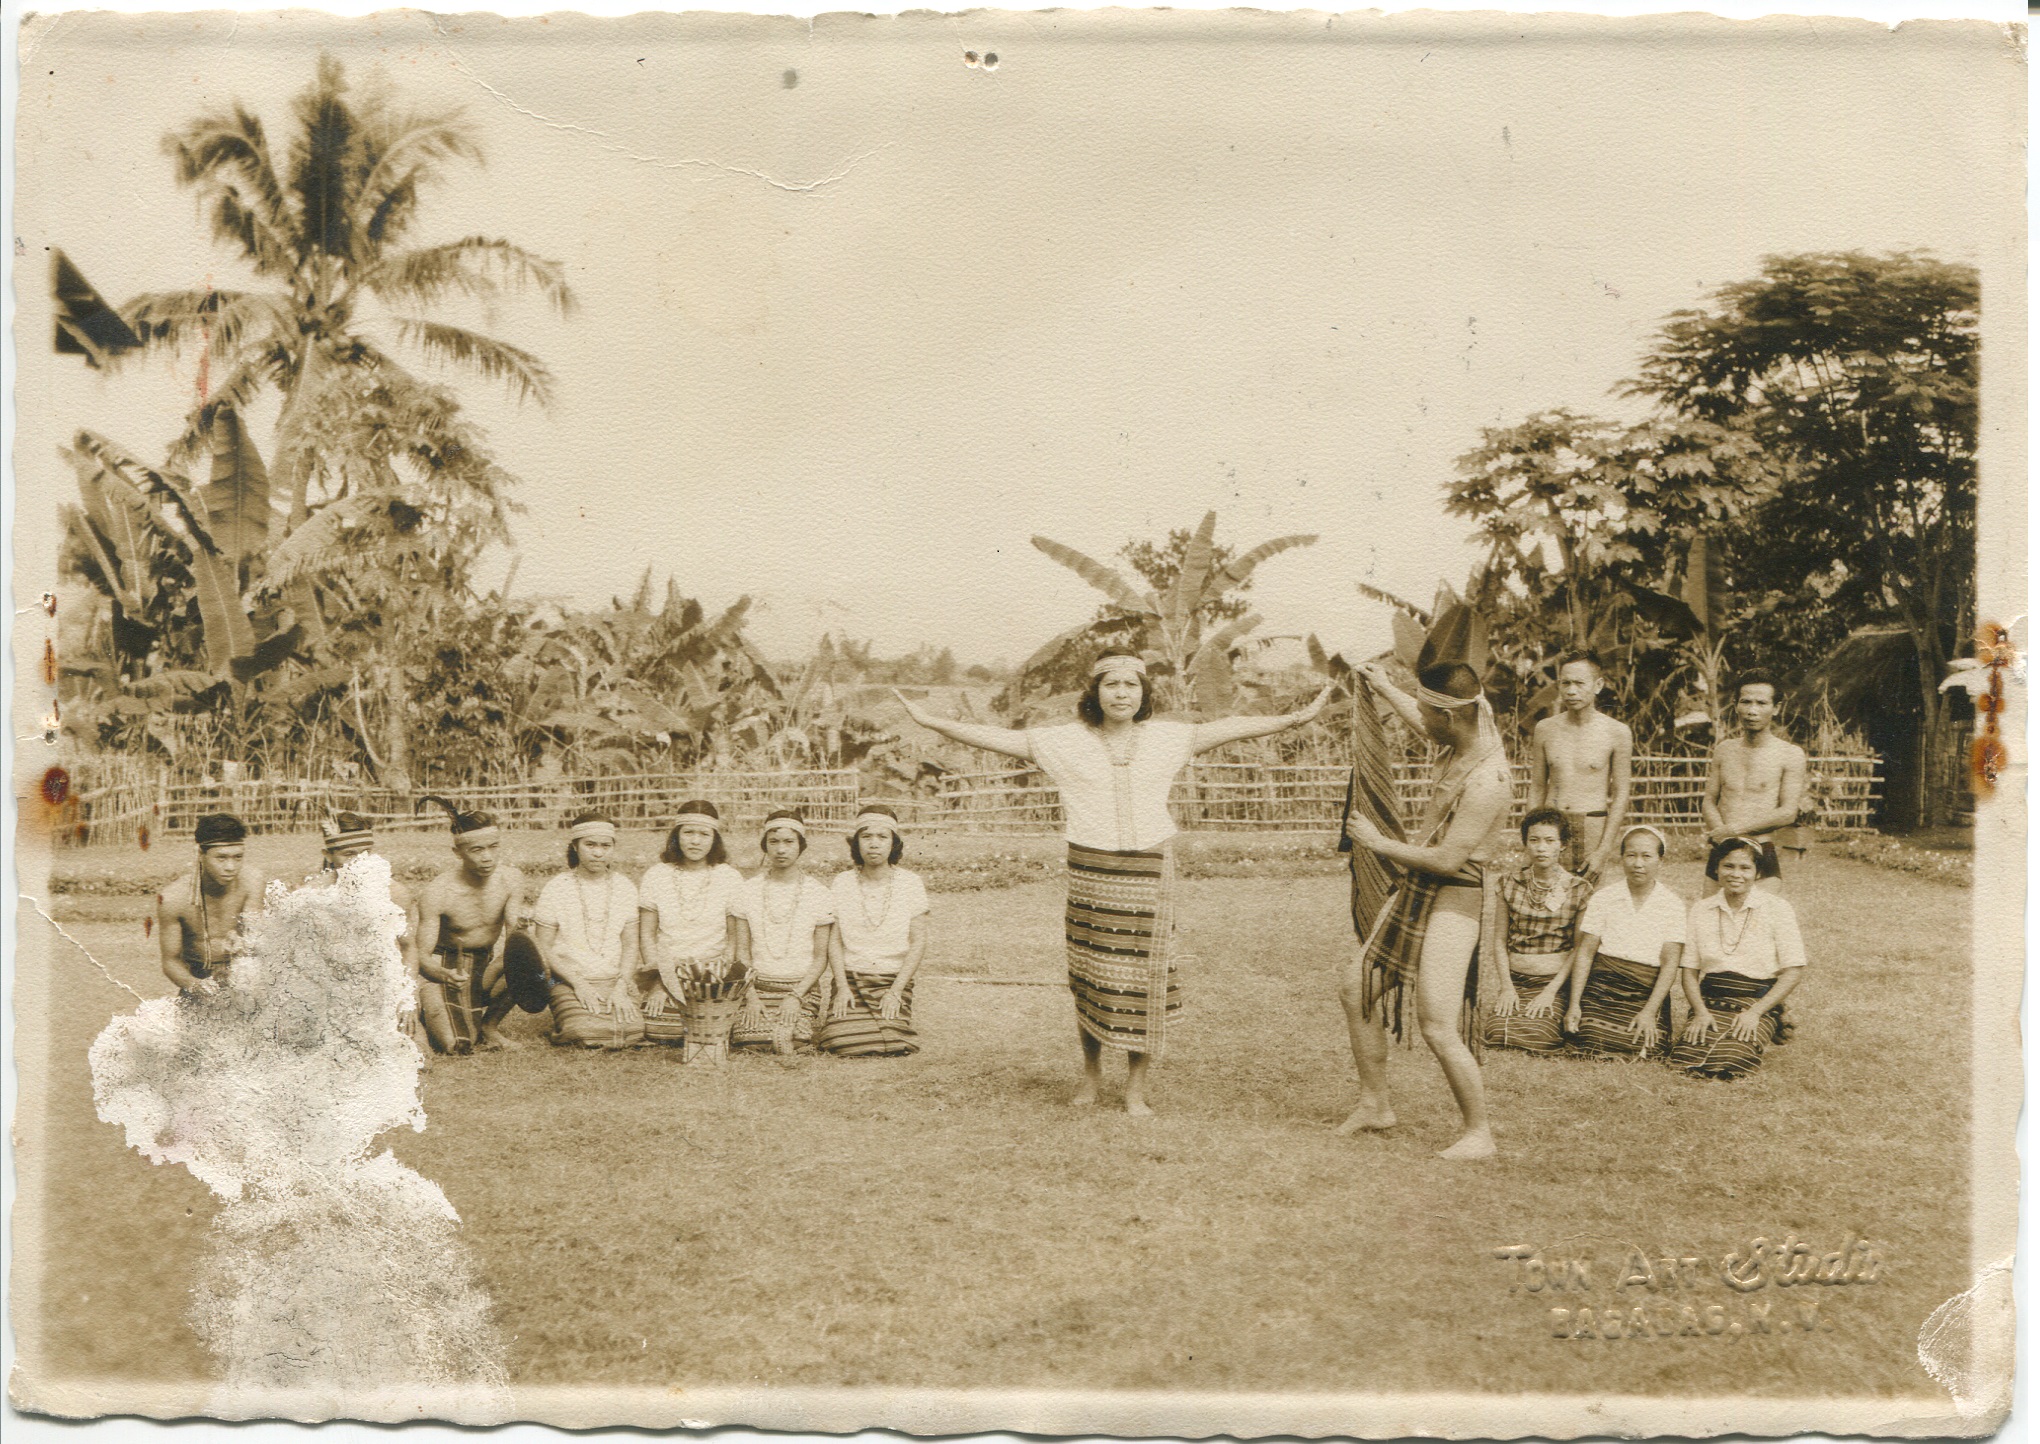 Photo of man and woman dancing, surrounded by other seated dancers. This photograph was taken sometime before 1970 and acquired around 2000 from family, after grandmother passed away. Made in Bagabag, Nueva Vizcaya, Luzon. A woman and man are pictured dancing, surrounded byother people kneeling to watch them dance or take part in the dance. Embossed Text: “Bagabag NV, Town Air Studio”. Reminds Surla of family, grandmother’s pride in her hometown, shows strength and presence. Any views, findings, conclusions, or recommendations expressed in this story do not necessarily represent those of the National Endowment for the Humanities. (c) Field Museum of Natural History - CC BY-NC 4.0